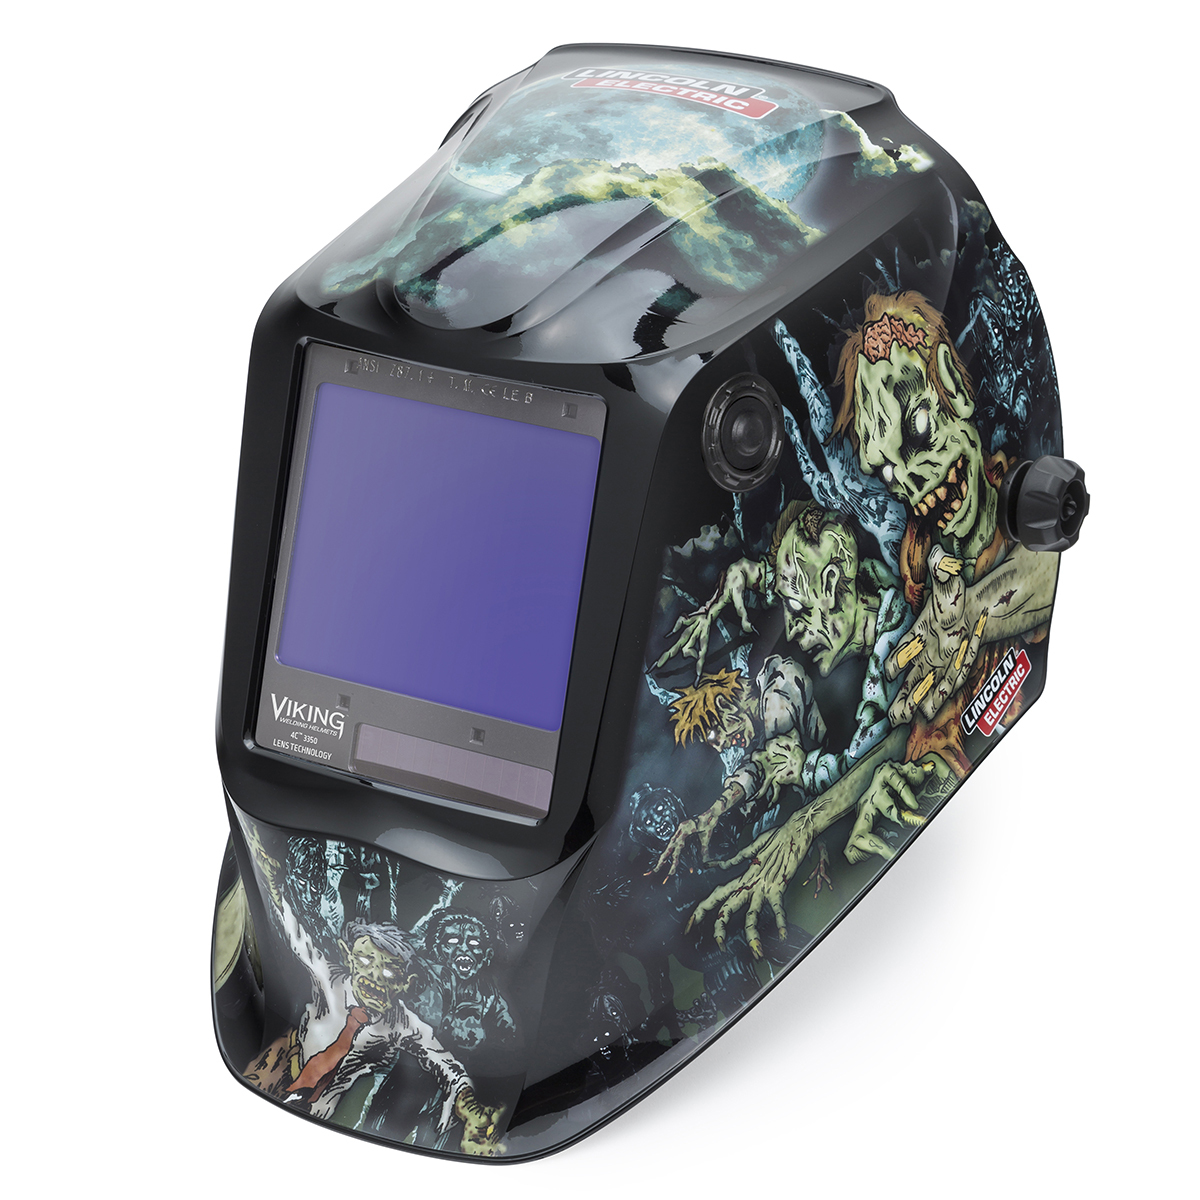 Lincoln Electric® VIKING® 3350 Black/Green Welding Helmet With Variable Shades 5 - 13 Auto Darkening Lens, 4C® Lens Technology A